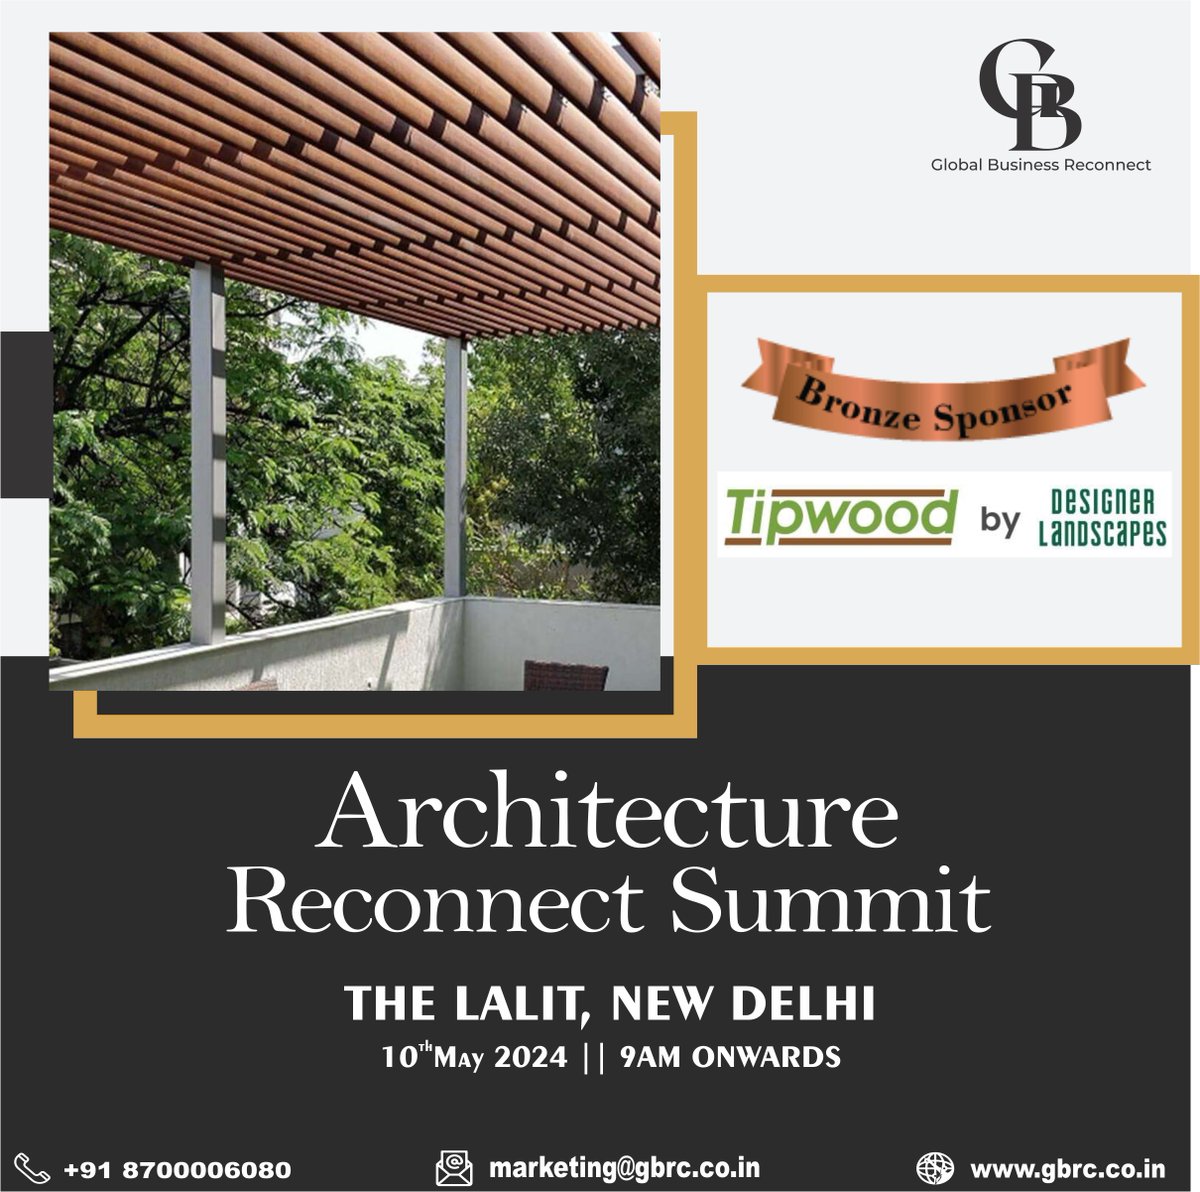 We're delighted to have Tip Wood with us as a bronze sponsor for our upcoming Architecture Reconnect Summit
Thier support is invaluable and will help make this event truly extraordinary

📷Save the Date:
10th of May 2024
📷 The Lalit, New Delhi

#architecturereconnectsummit #GBRC